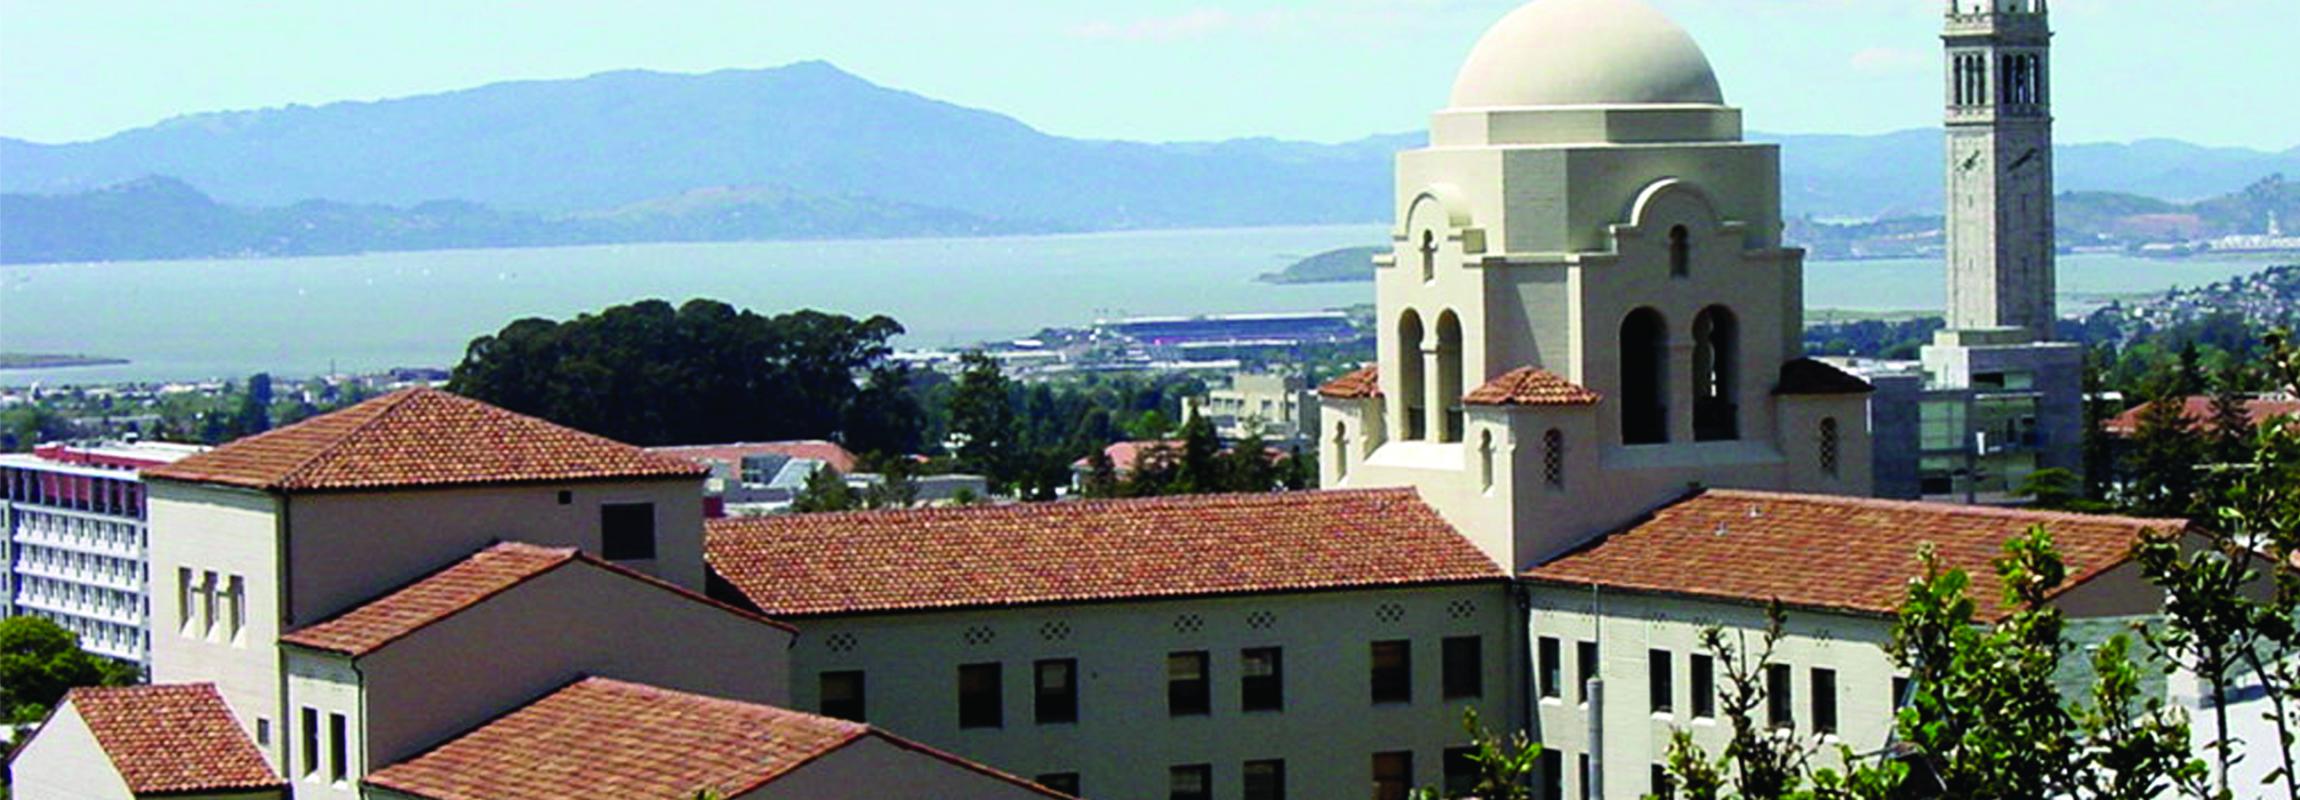 Photo of UC Berkeley buildings, with the Campanile and the bay in the background